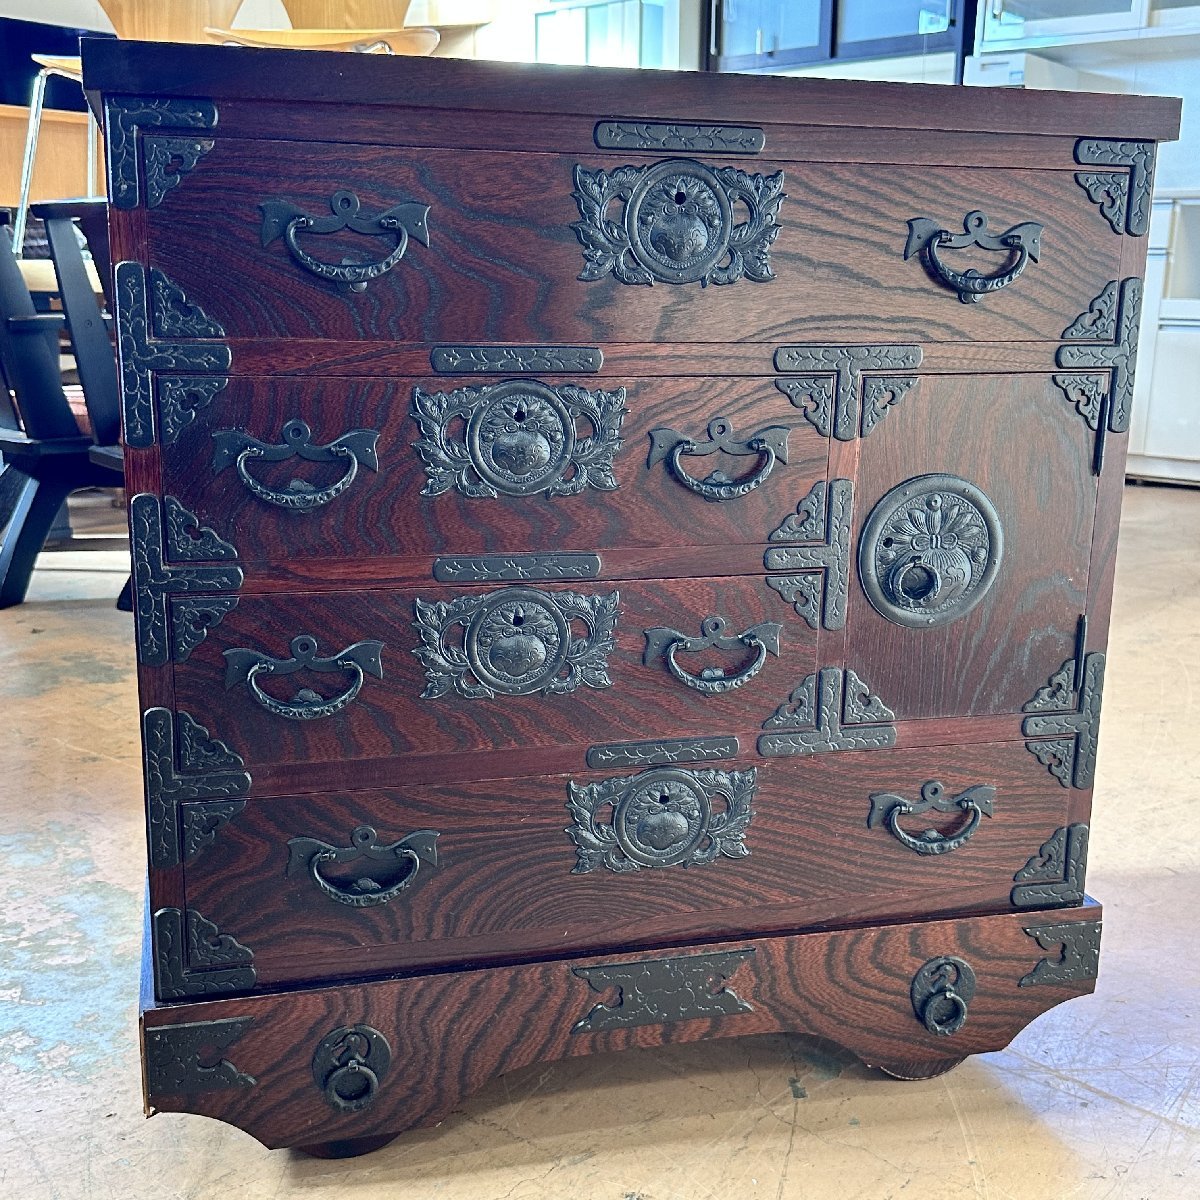  used top class tradition industrial arts .. lacquer paint natural tree cosmetics . board 999 sphere . type car Ⅱ number .. rock .. chest of drawers car chest of drawers costume chest of drawers era chest of drawers .. peace furniture wistaria . woodworking 